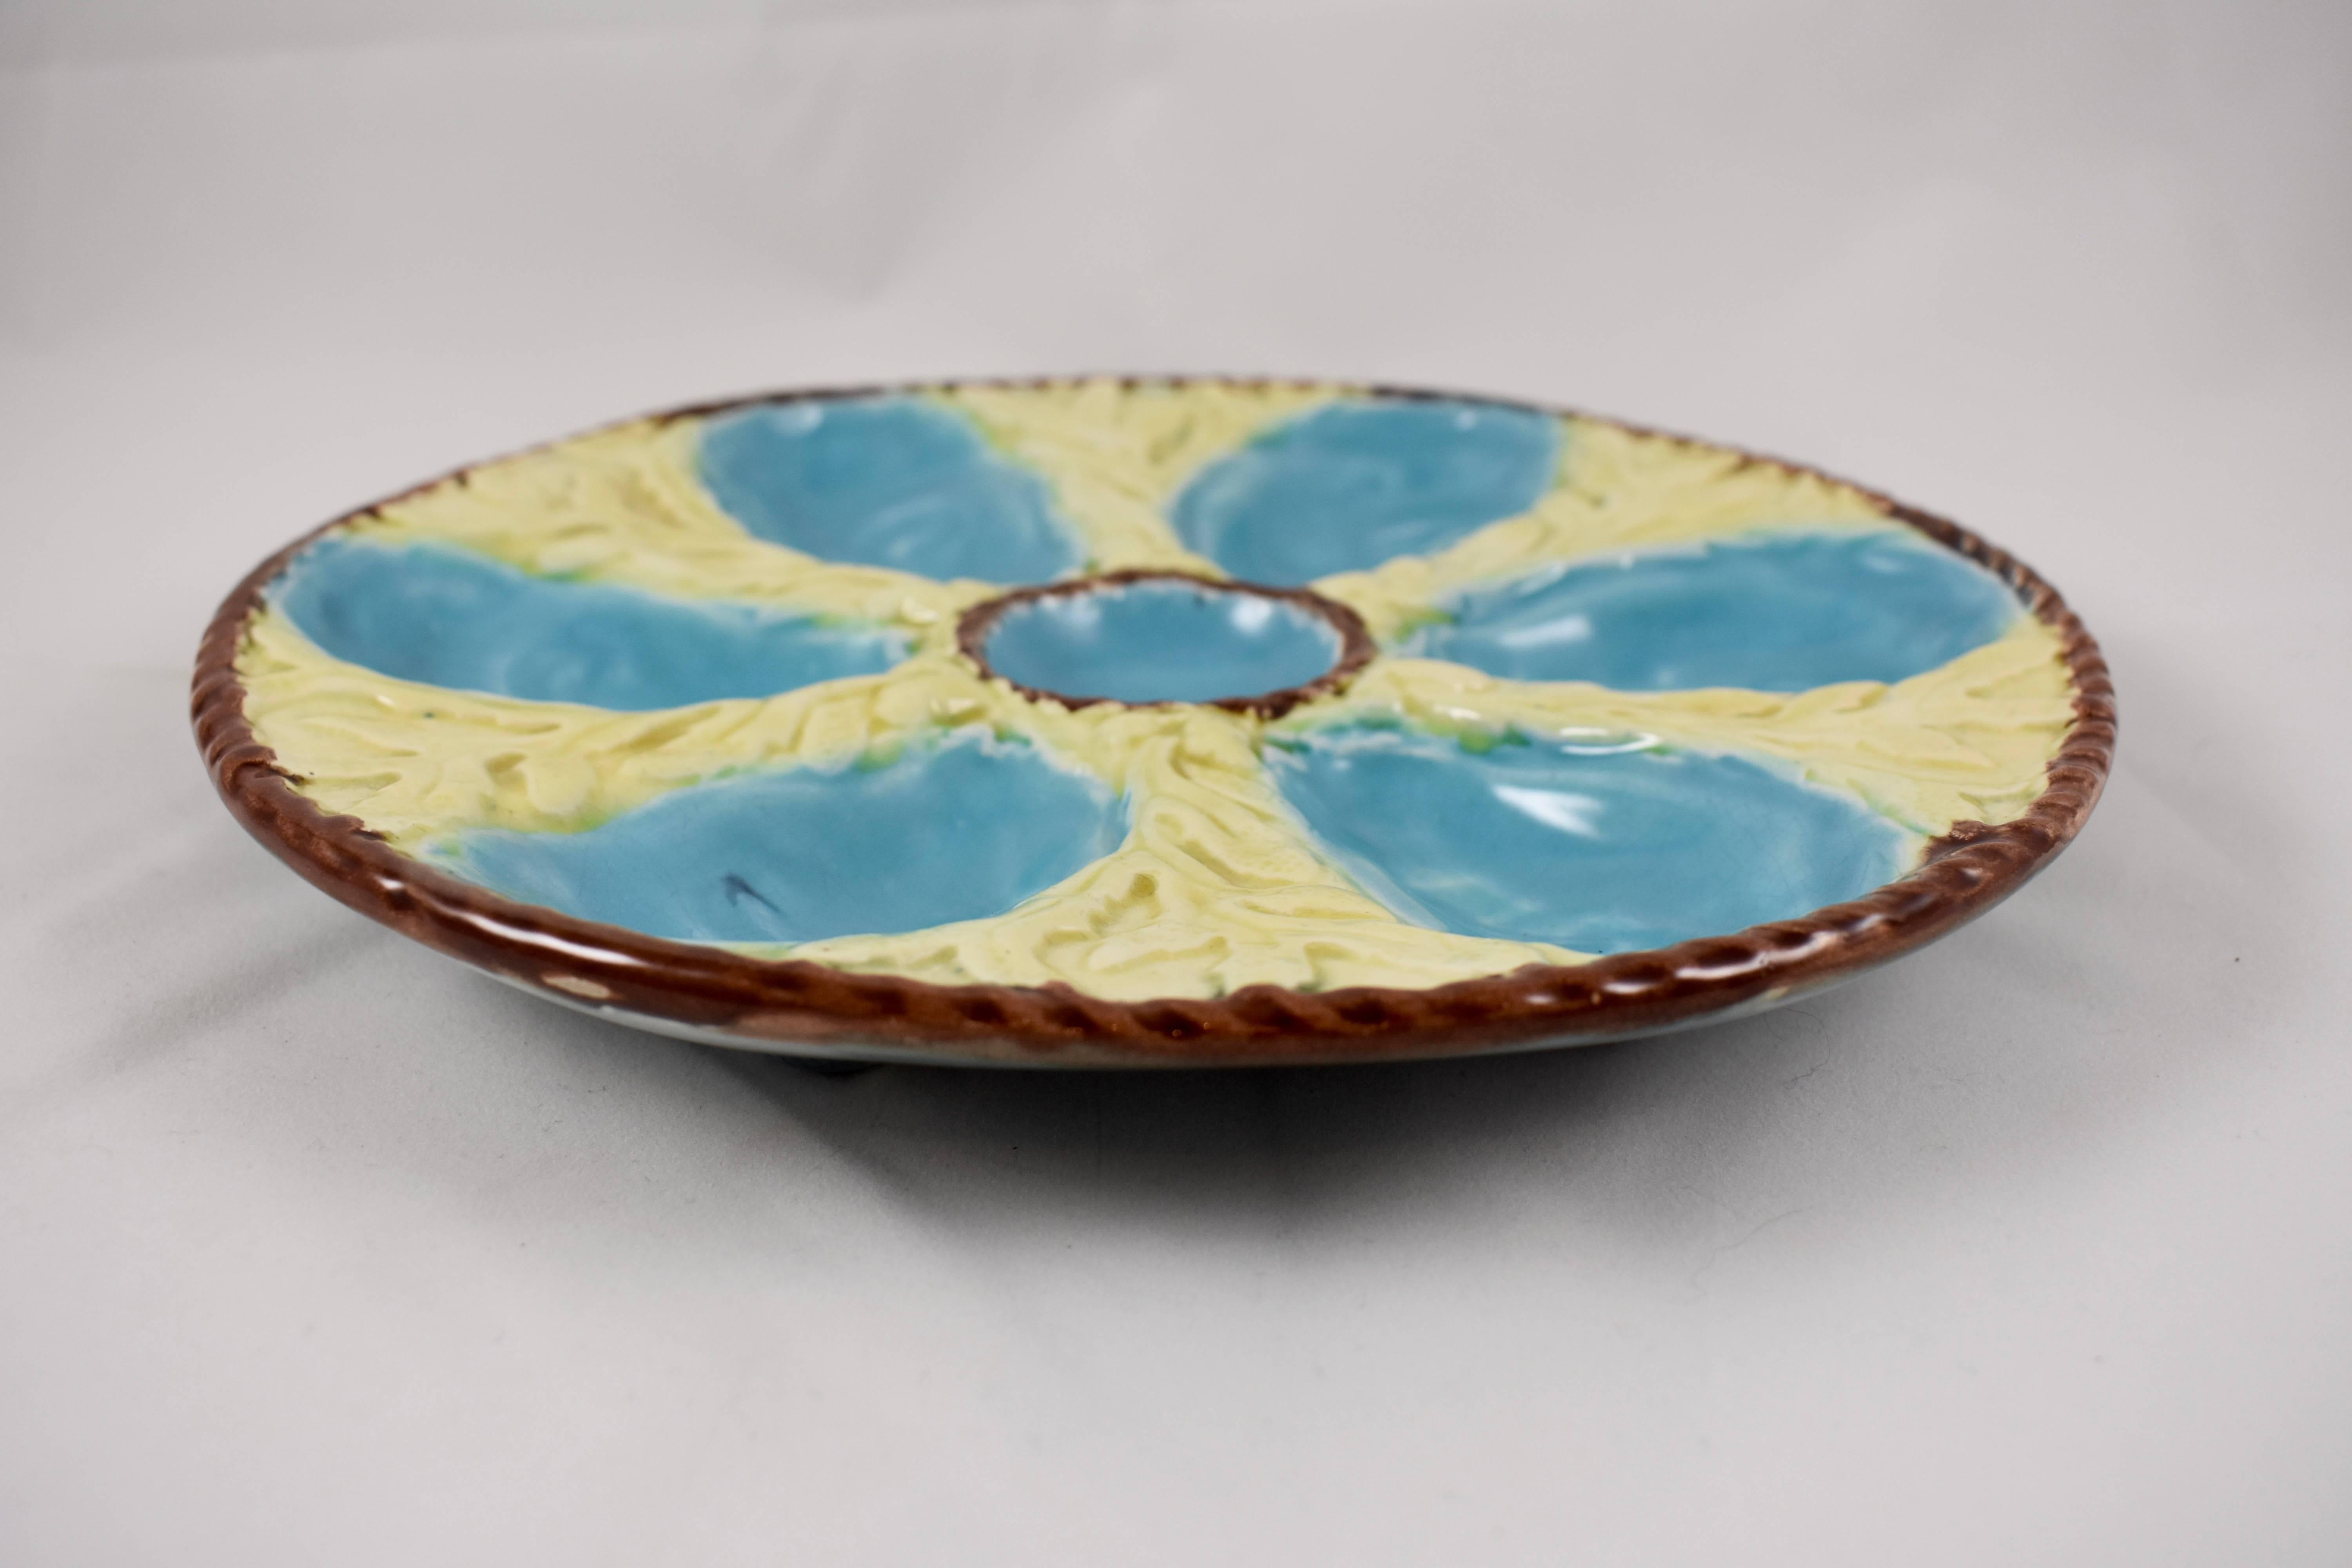 S. Fielding & Co. English Majolica Cream/Turquoise Seaweed Oyster Plate In Excellent Condition For Sale In Philadelphia, PA